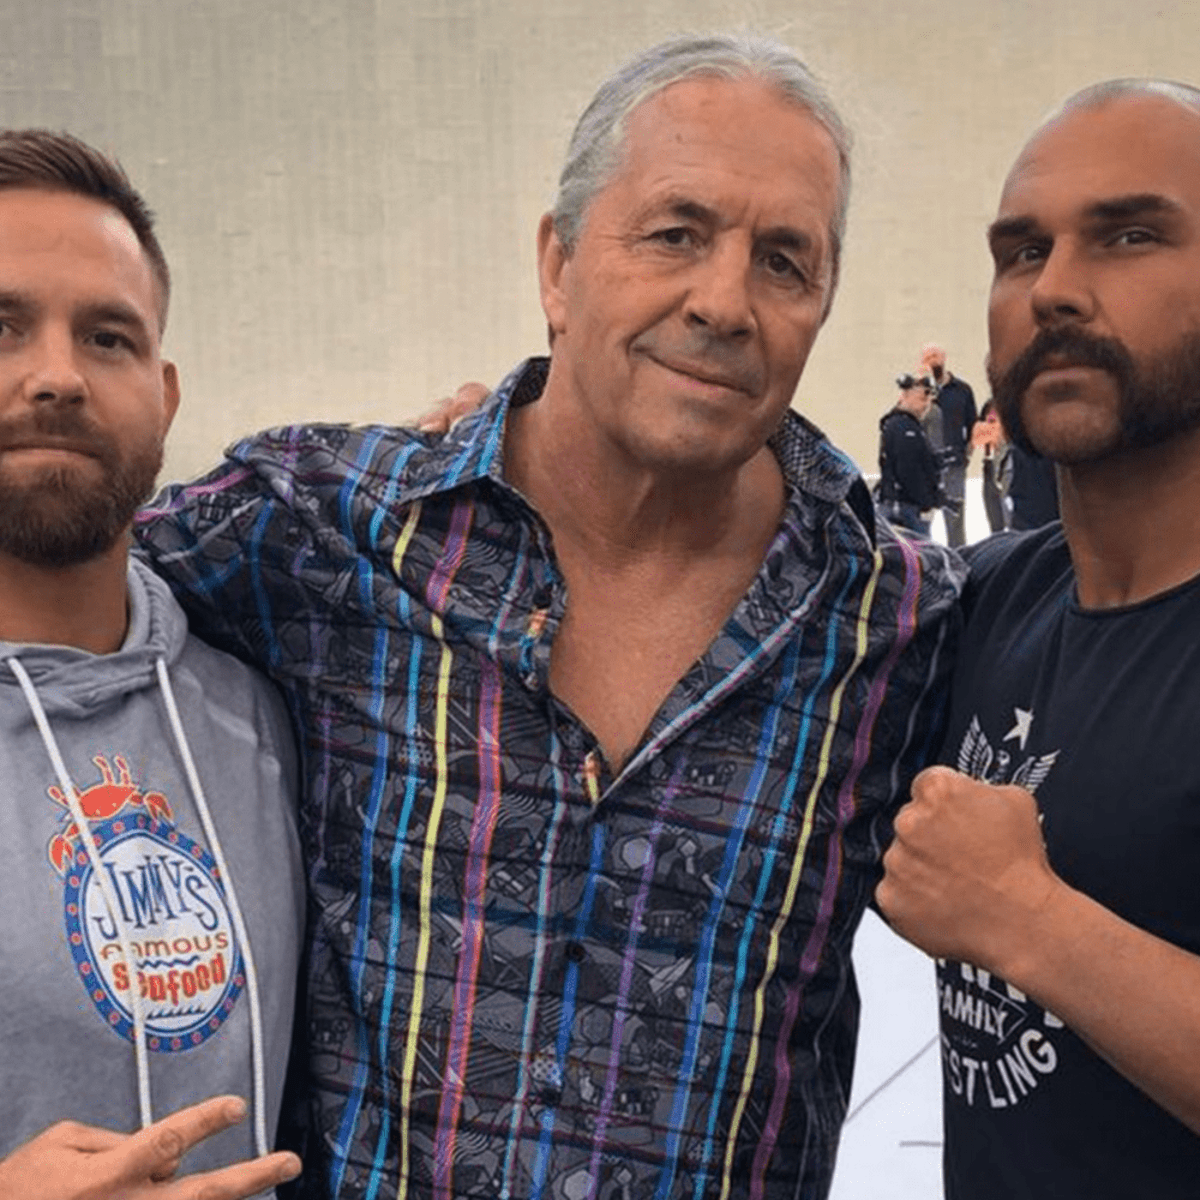 Bret Hart attends UFC in Calgary - WWE News, WWE Results, AEW News, AEW  Results